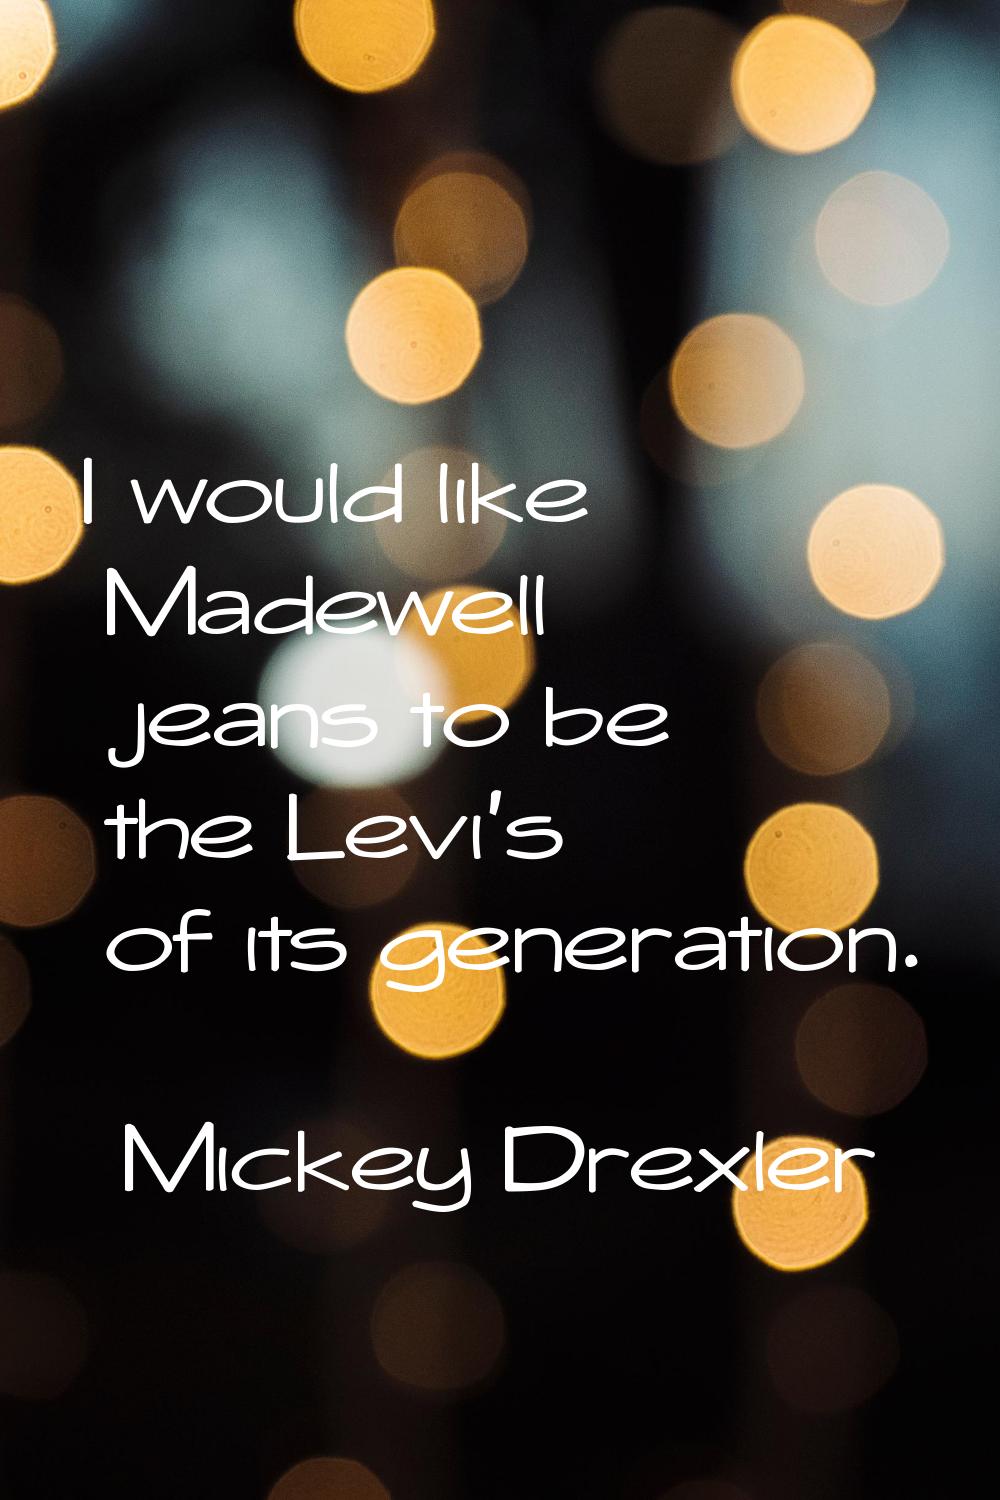 I would like Madewell jeans to be the Levi's of its generation.